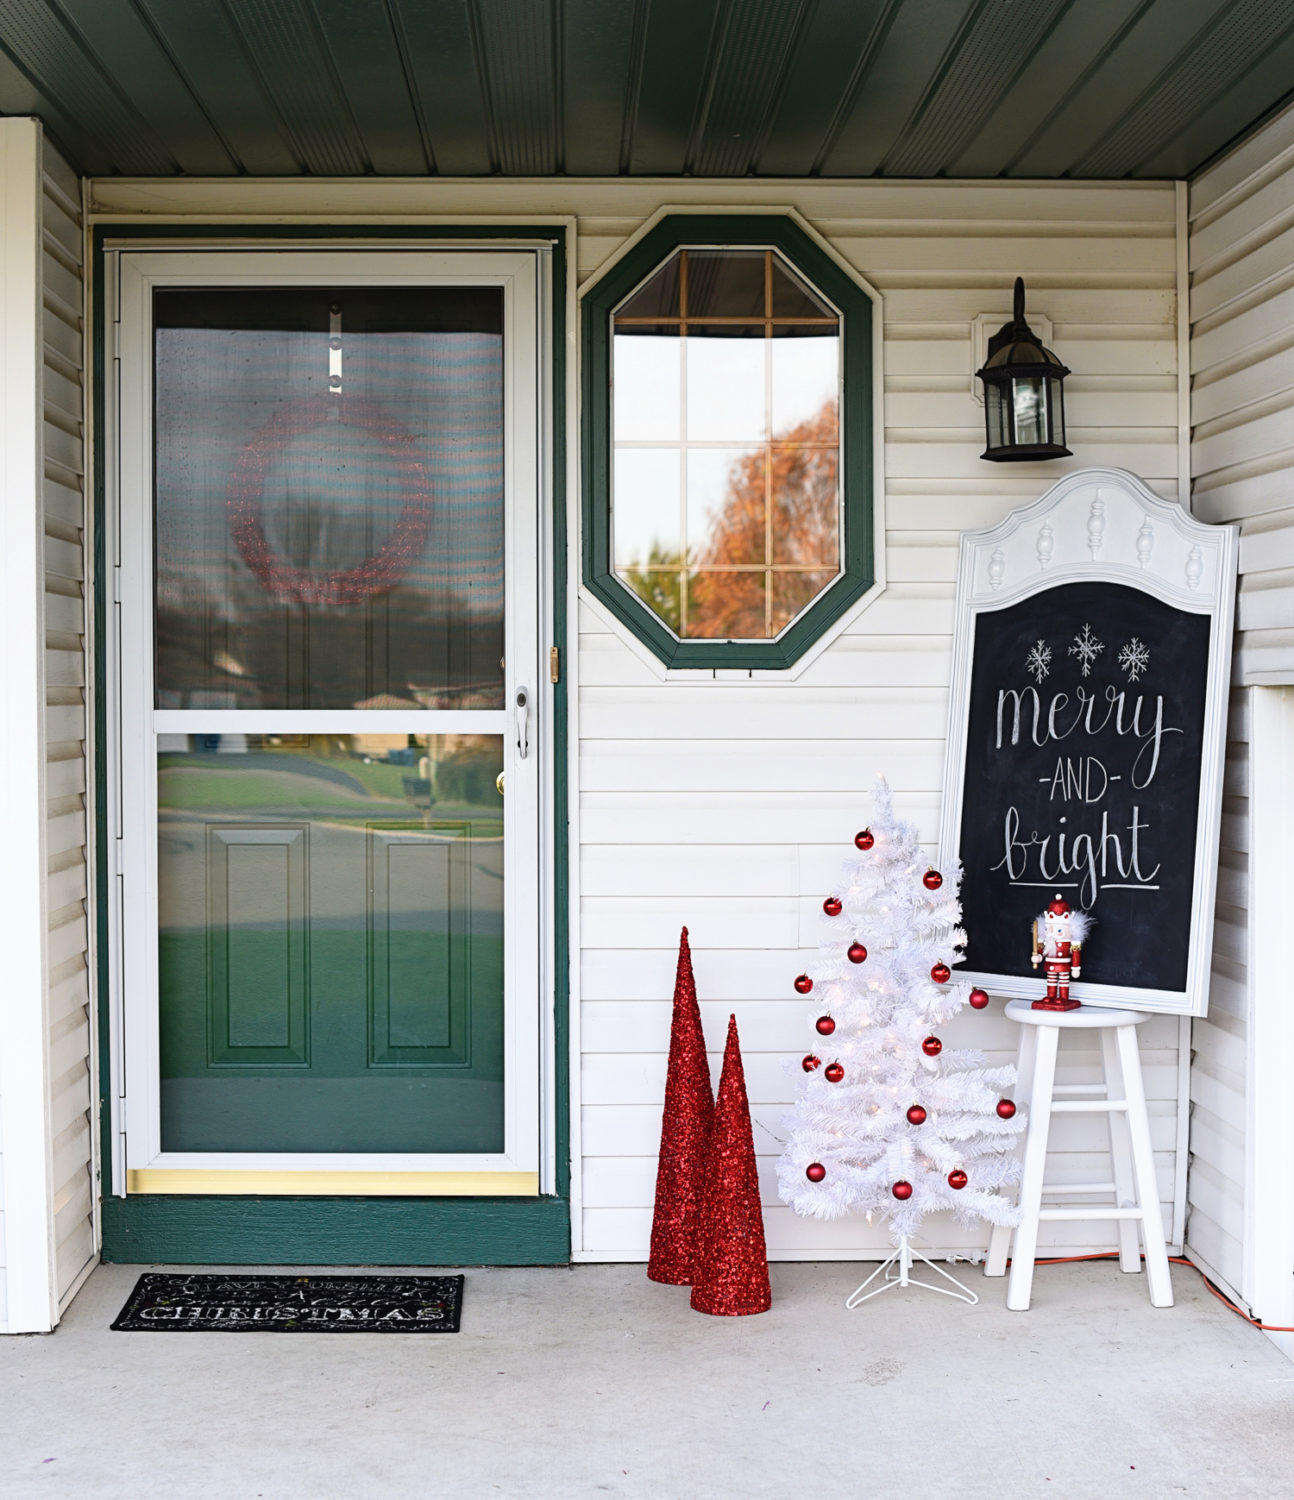 Christmas Front Porch Decor- When you're doing some holiday decorating, don't forget your front porch! Turn your front porch into a festive Christmas display with these simple and frugal decorations. 